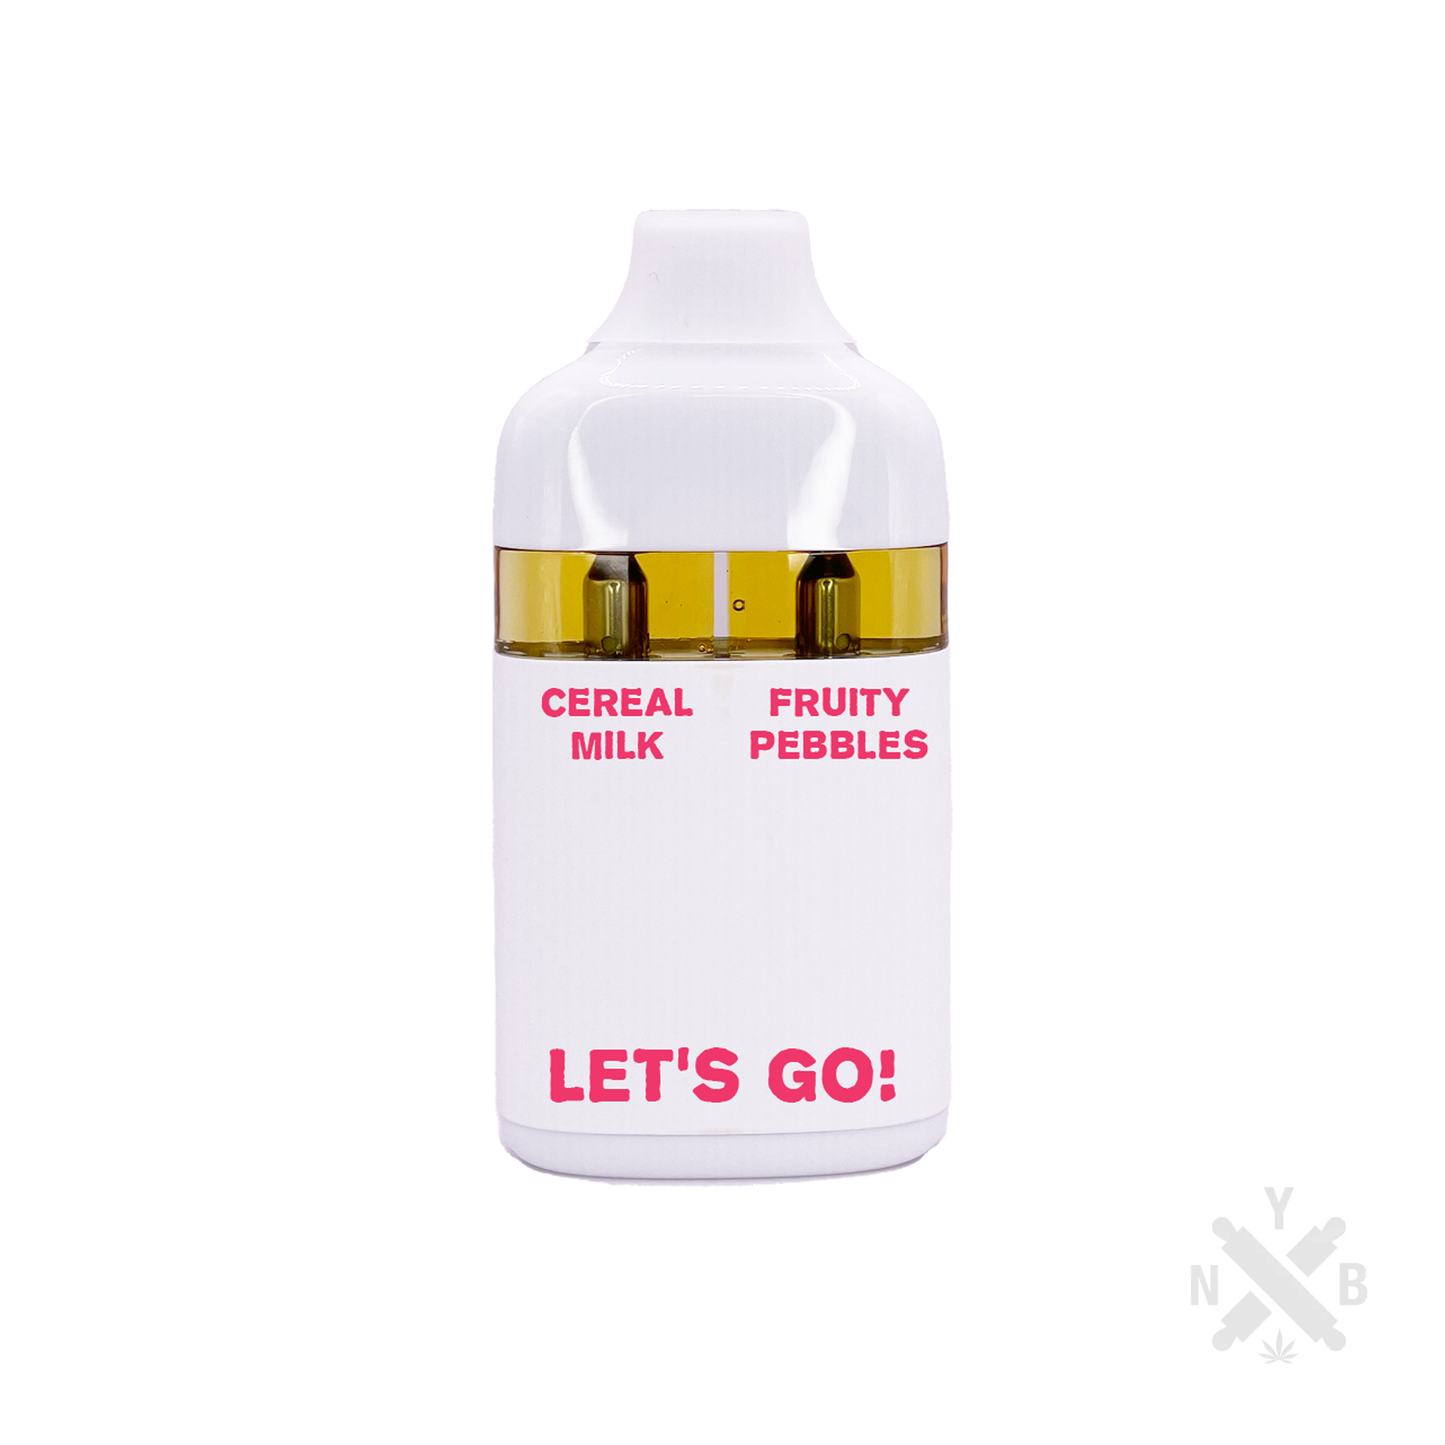 Let's Go! 6ml Disposable Vape Cereal milk + Fruity Pebbles by: Not Your Bakery